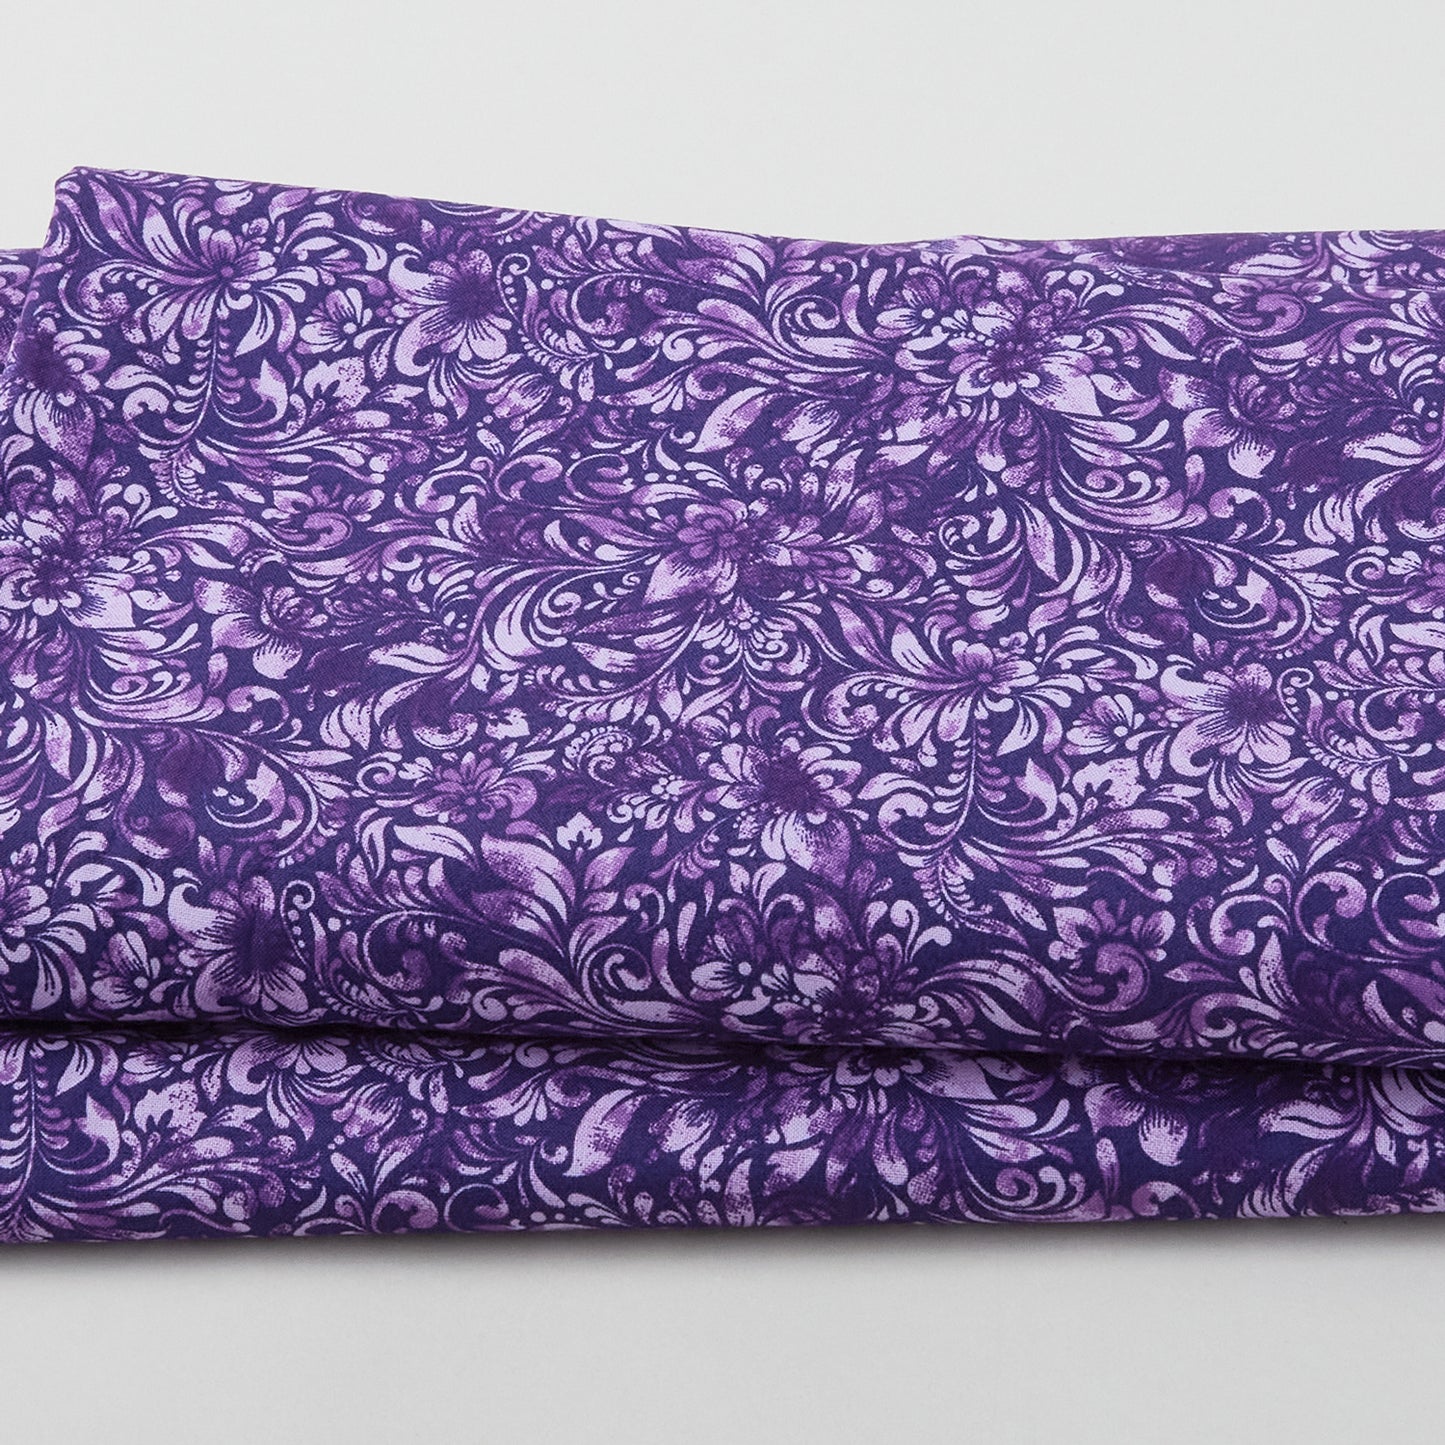 Allure - Watercolor Textured Floral Lilac 118" Wide 3 Yard Cut Primary Image